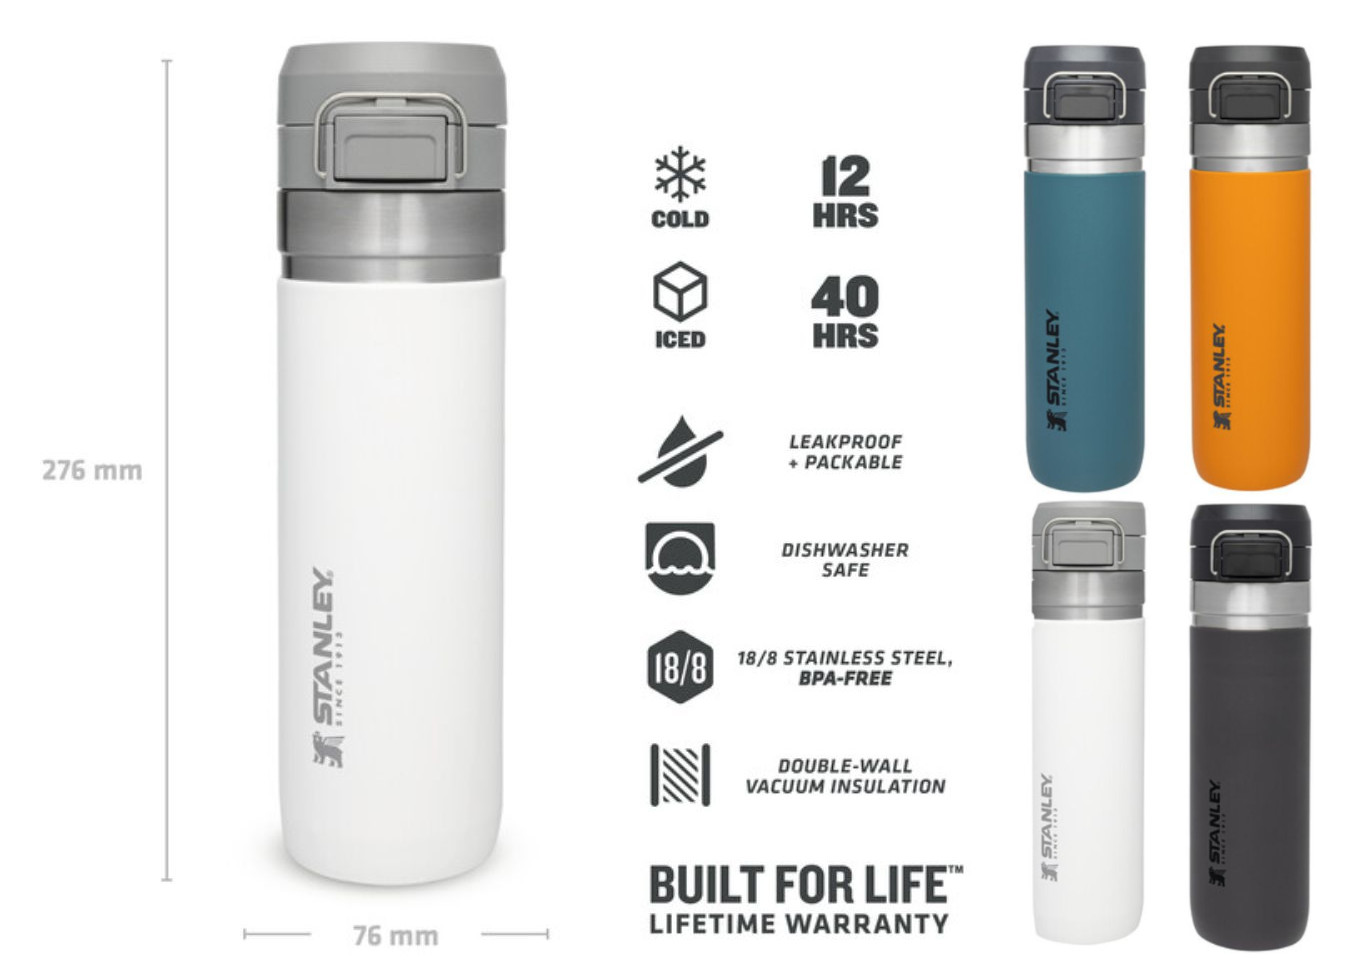  STANLEY Quick Flip Stainless Steel Water Bottle .71L / 24OZ  Saffron – Leakproof Insulated Water Bottle - Push Button Locking Lid -  BPA-Free Thermos Flask - Cup Holder Compatible - Dishwasher